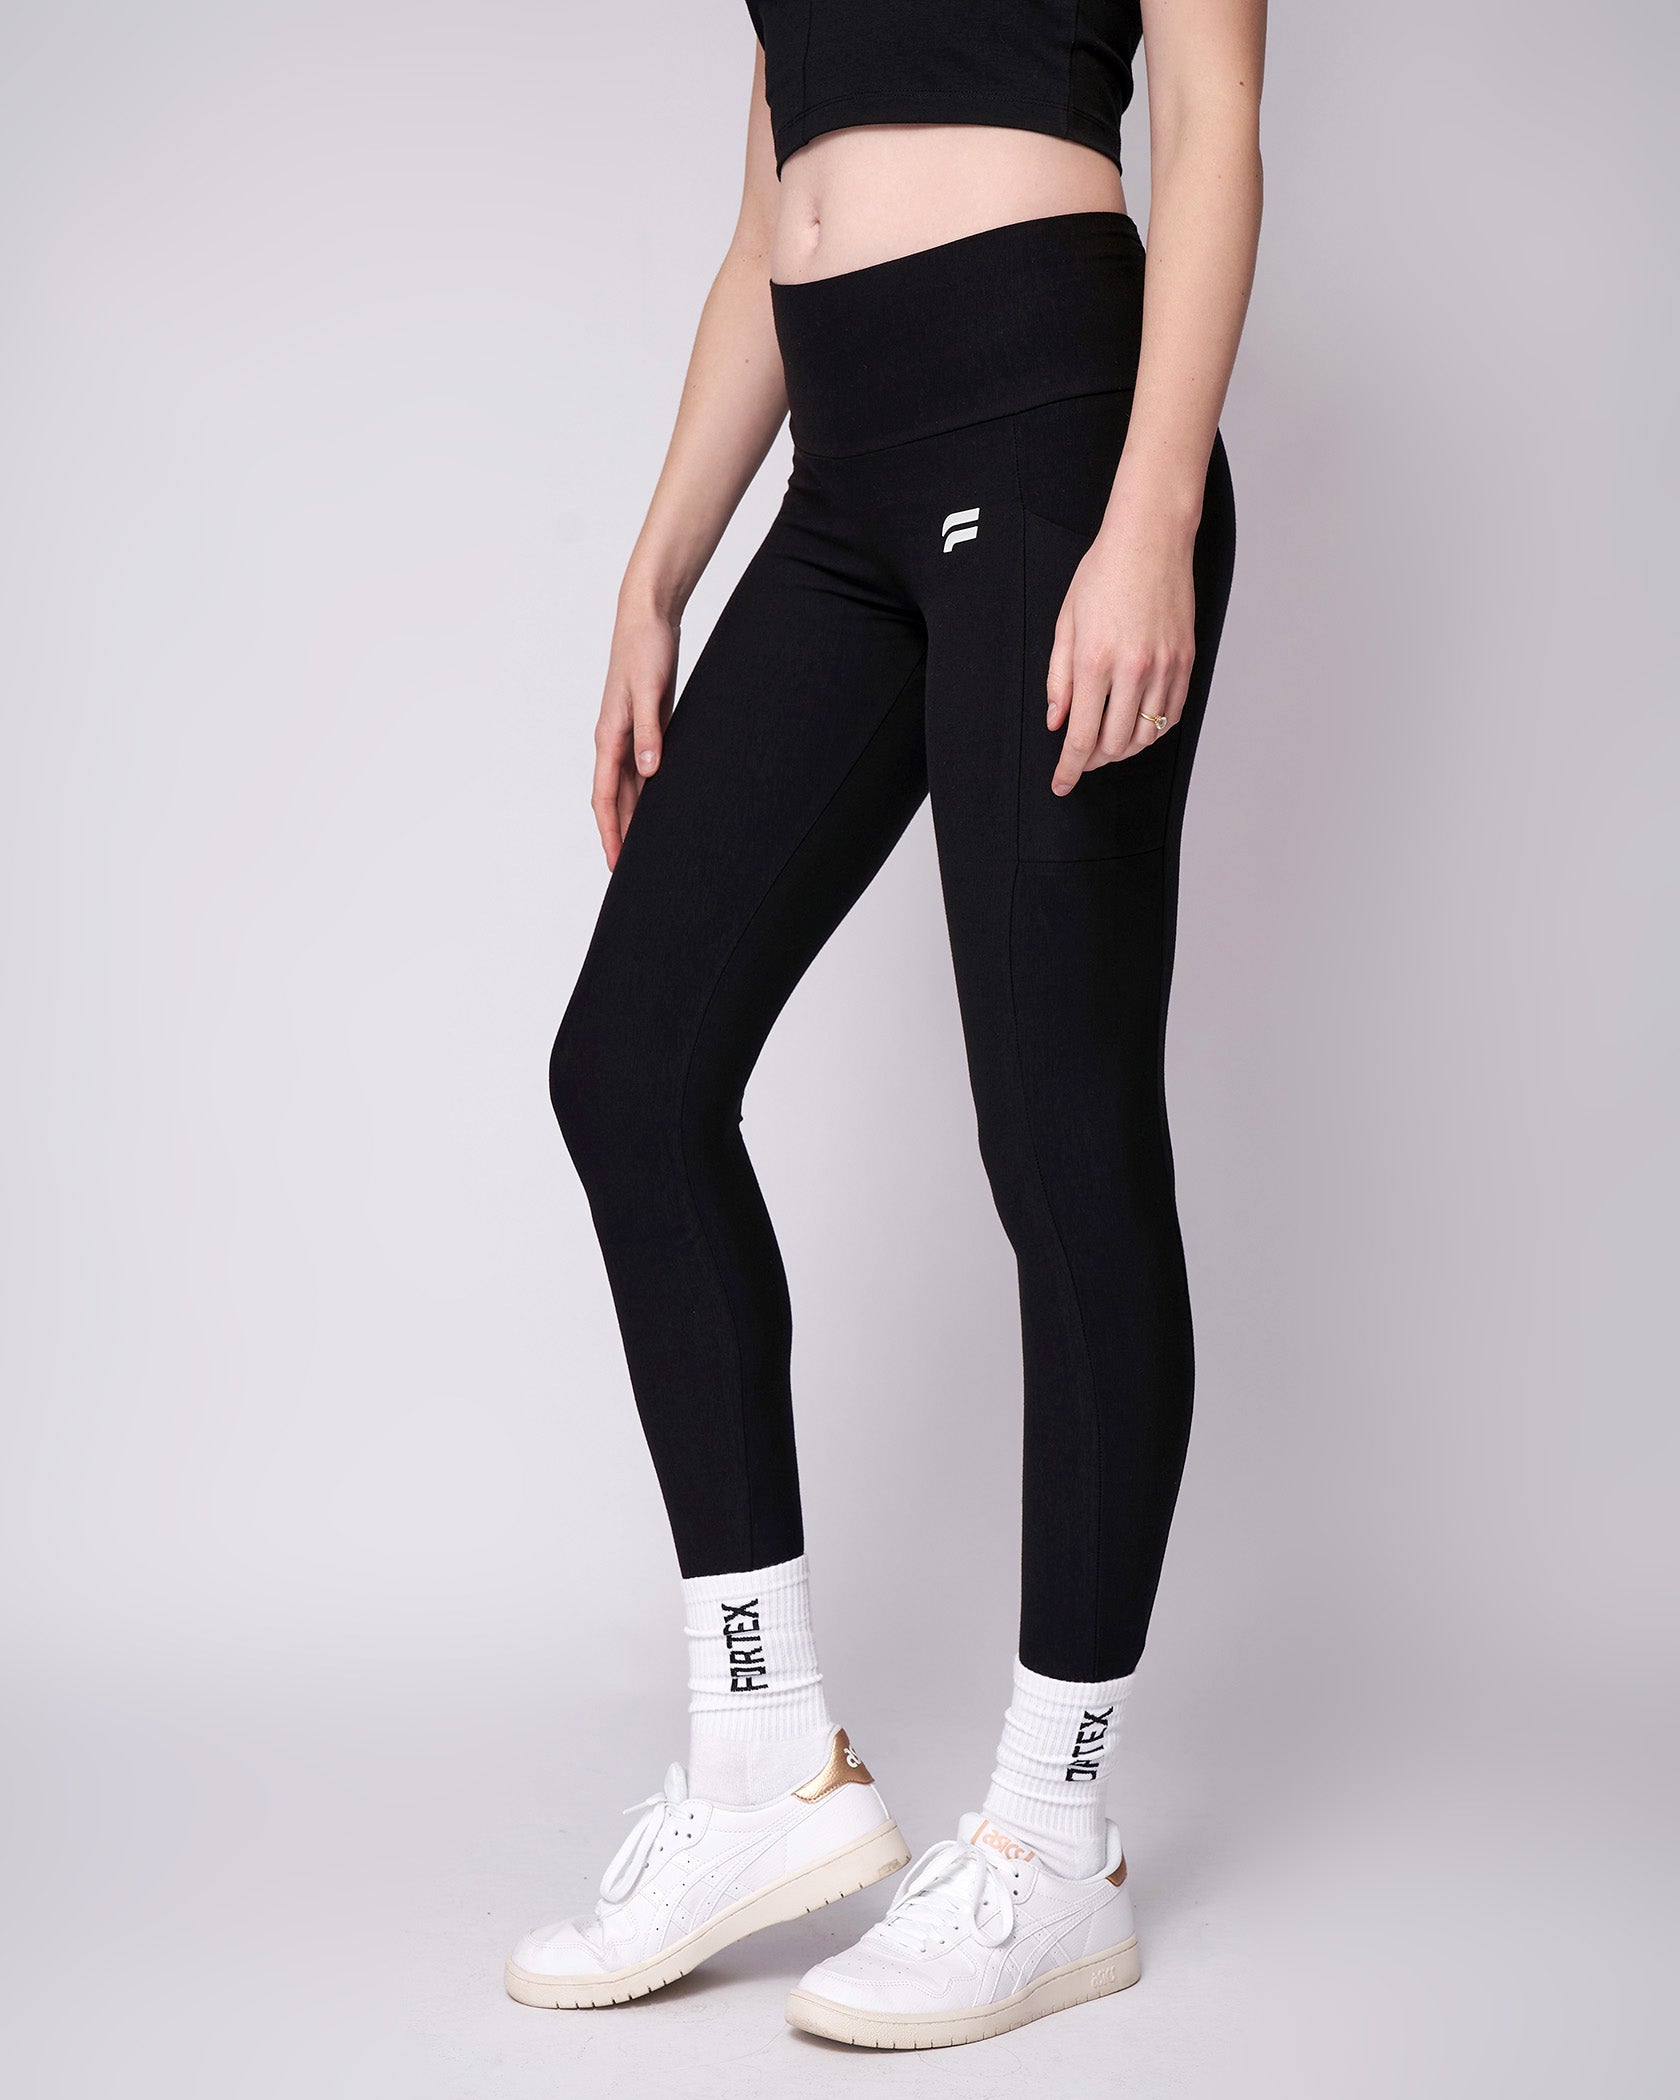 ADIDAS LEGGINGS in black / size M / fits like a